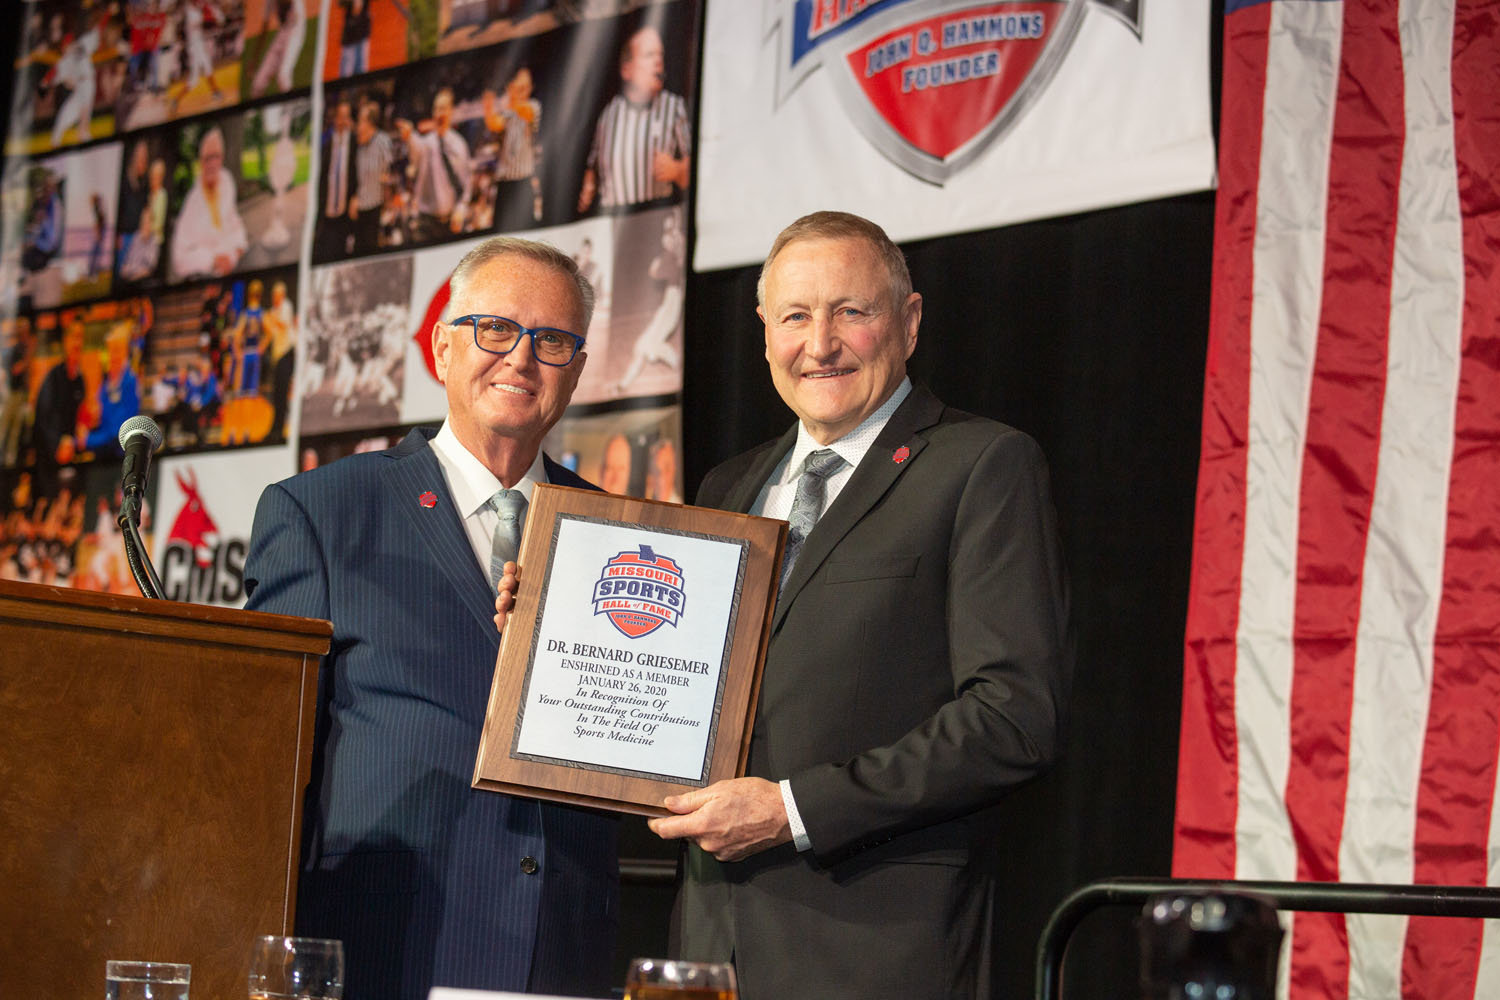 IN THE HALL
During the Jan. 26 Missouri Sports Hall of Fame 2020 Enshrinement Ceremony, Dr. Bernard Griesemer receives a plaque for his career in sports medicine from hall director Jerald Andrews, left. Among the professional athletes inducted were Derrick Johnson, Terry Pendleton and Brad Ziegler.